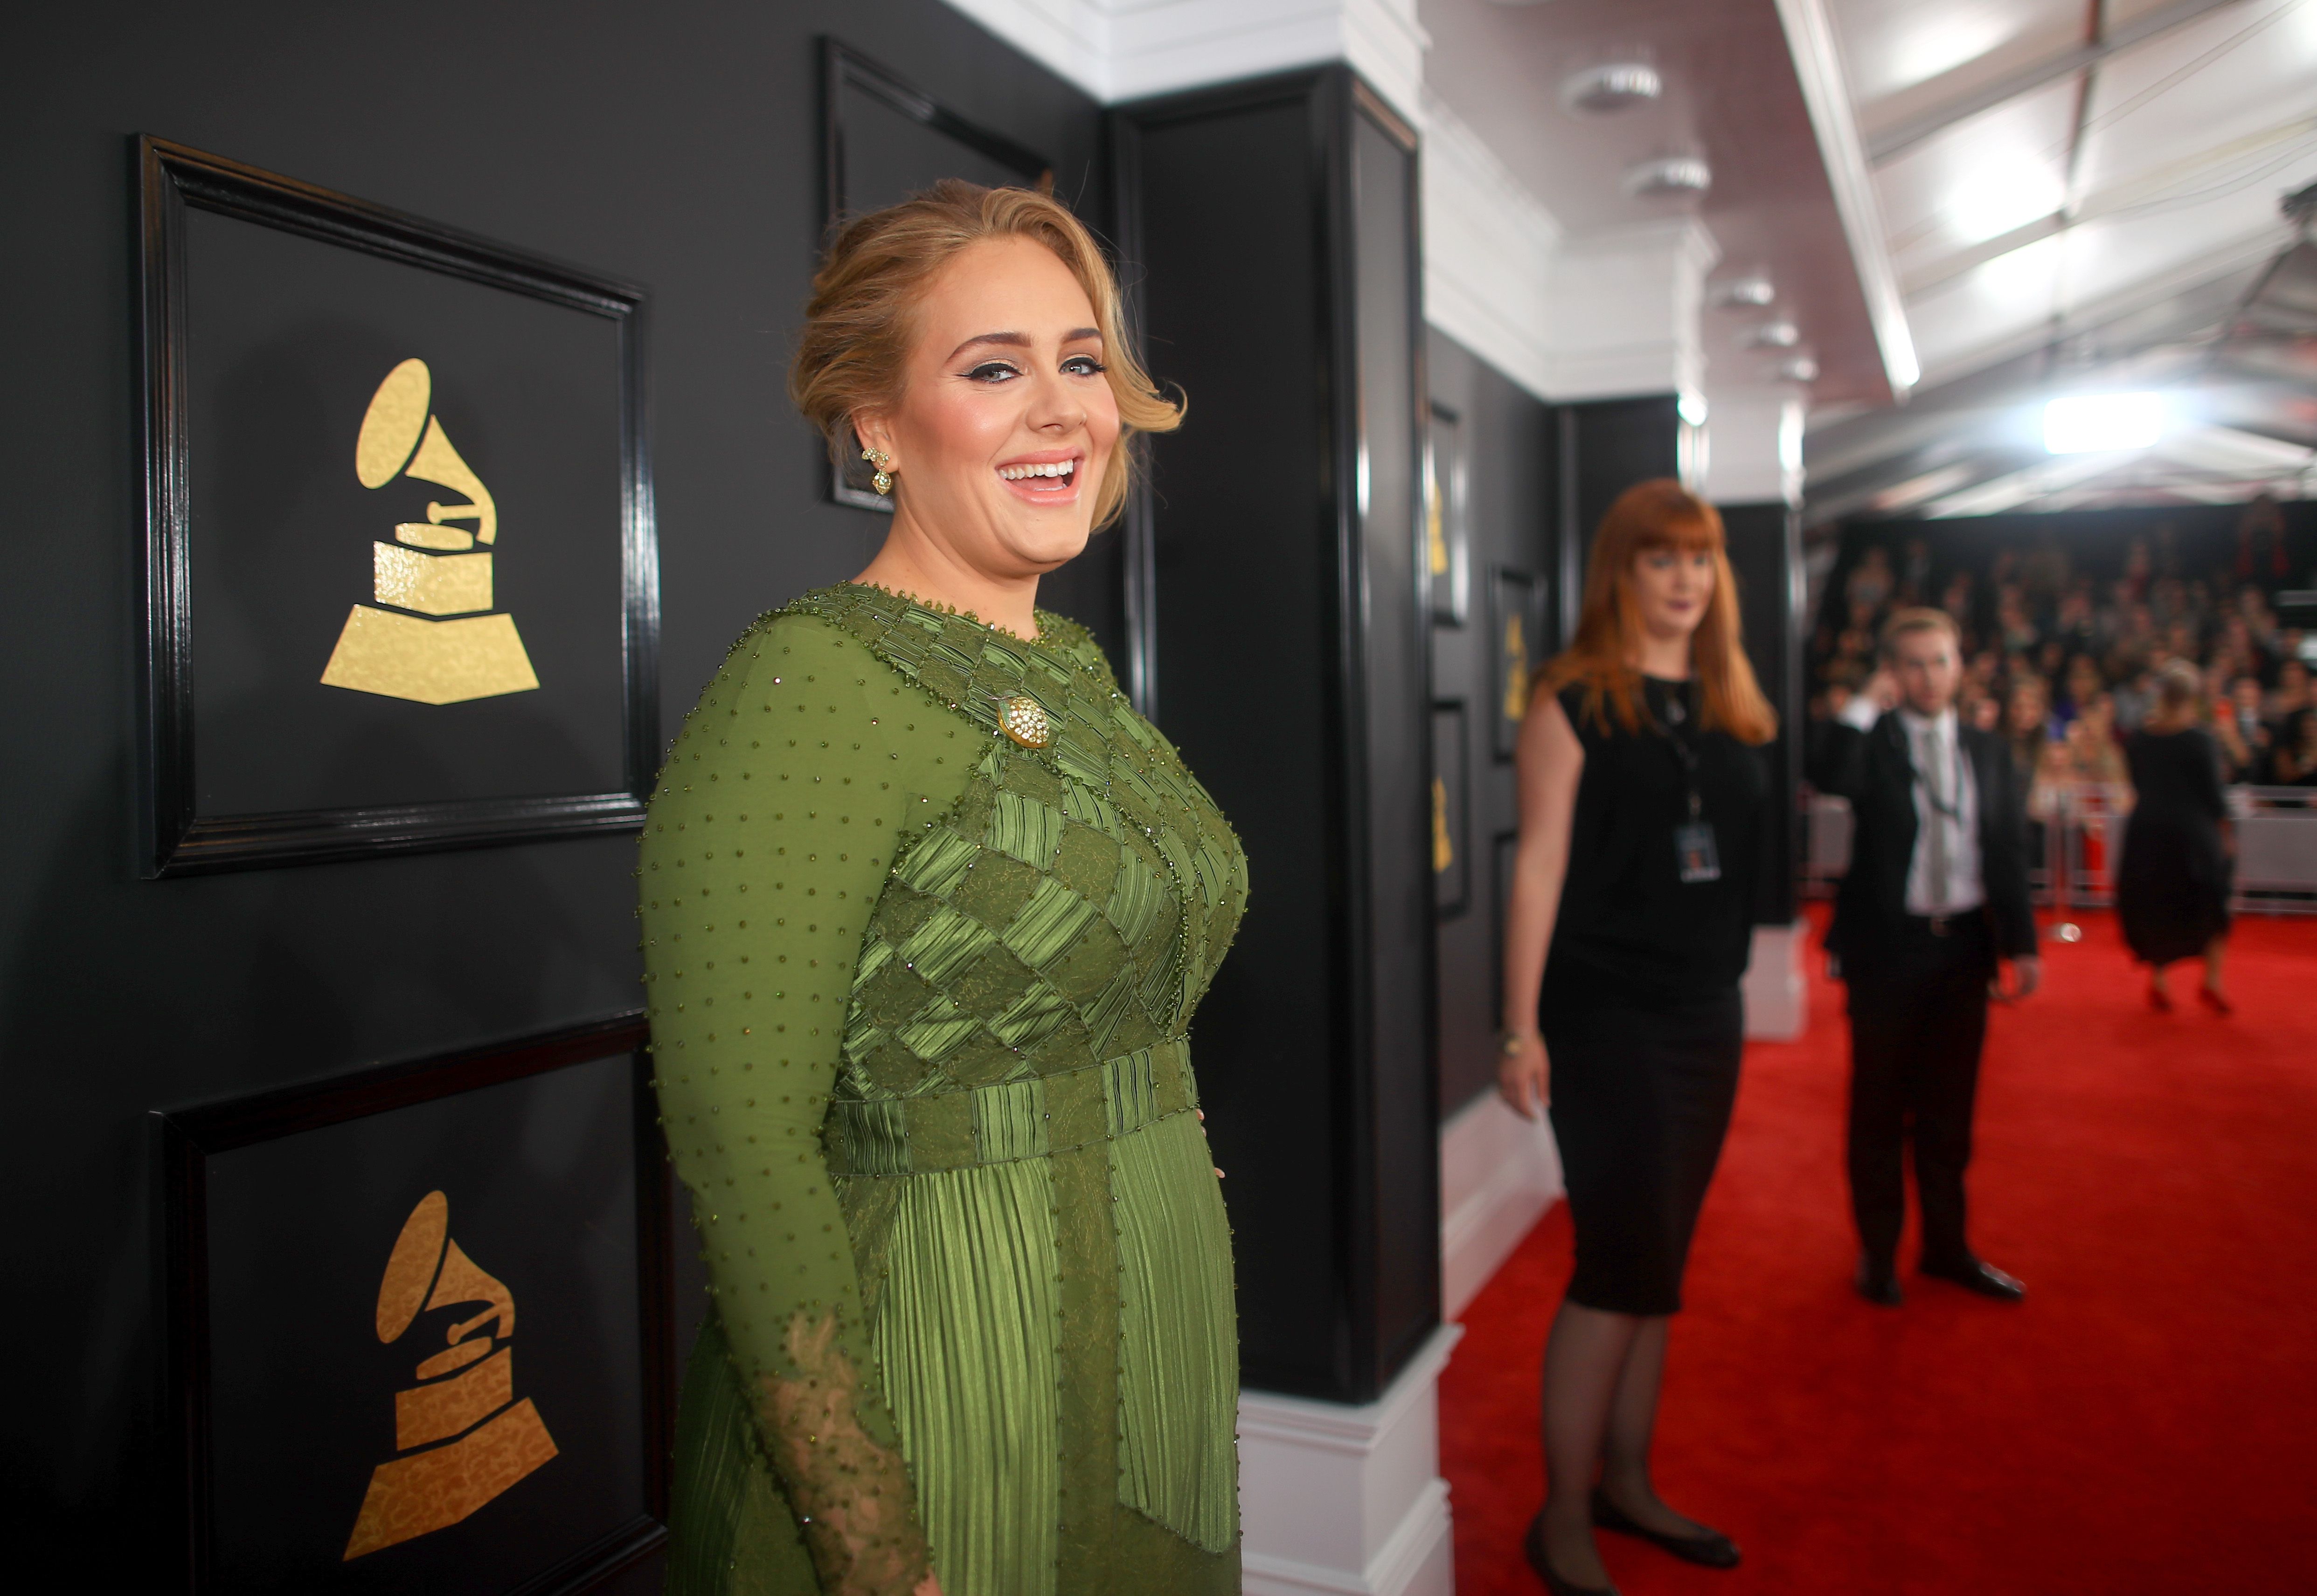  Adele attends The 59th GRAMMY Awards at STAPLES Center on February 12, 2017 in Los Angeles, California. | Source: Getty Images